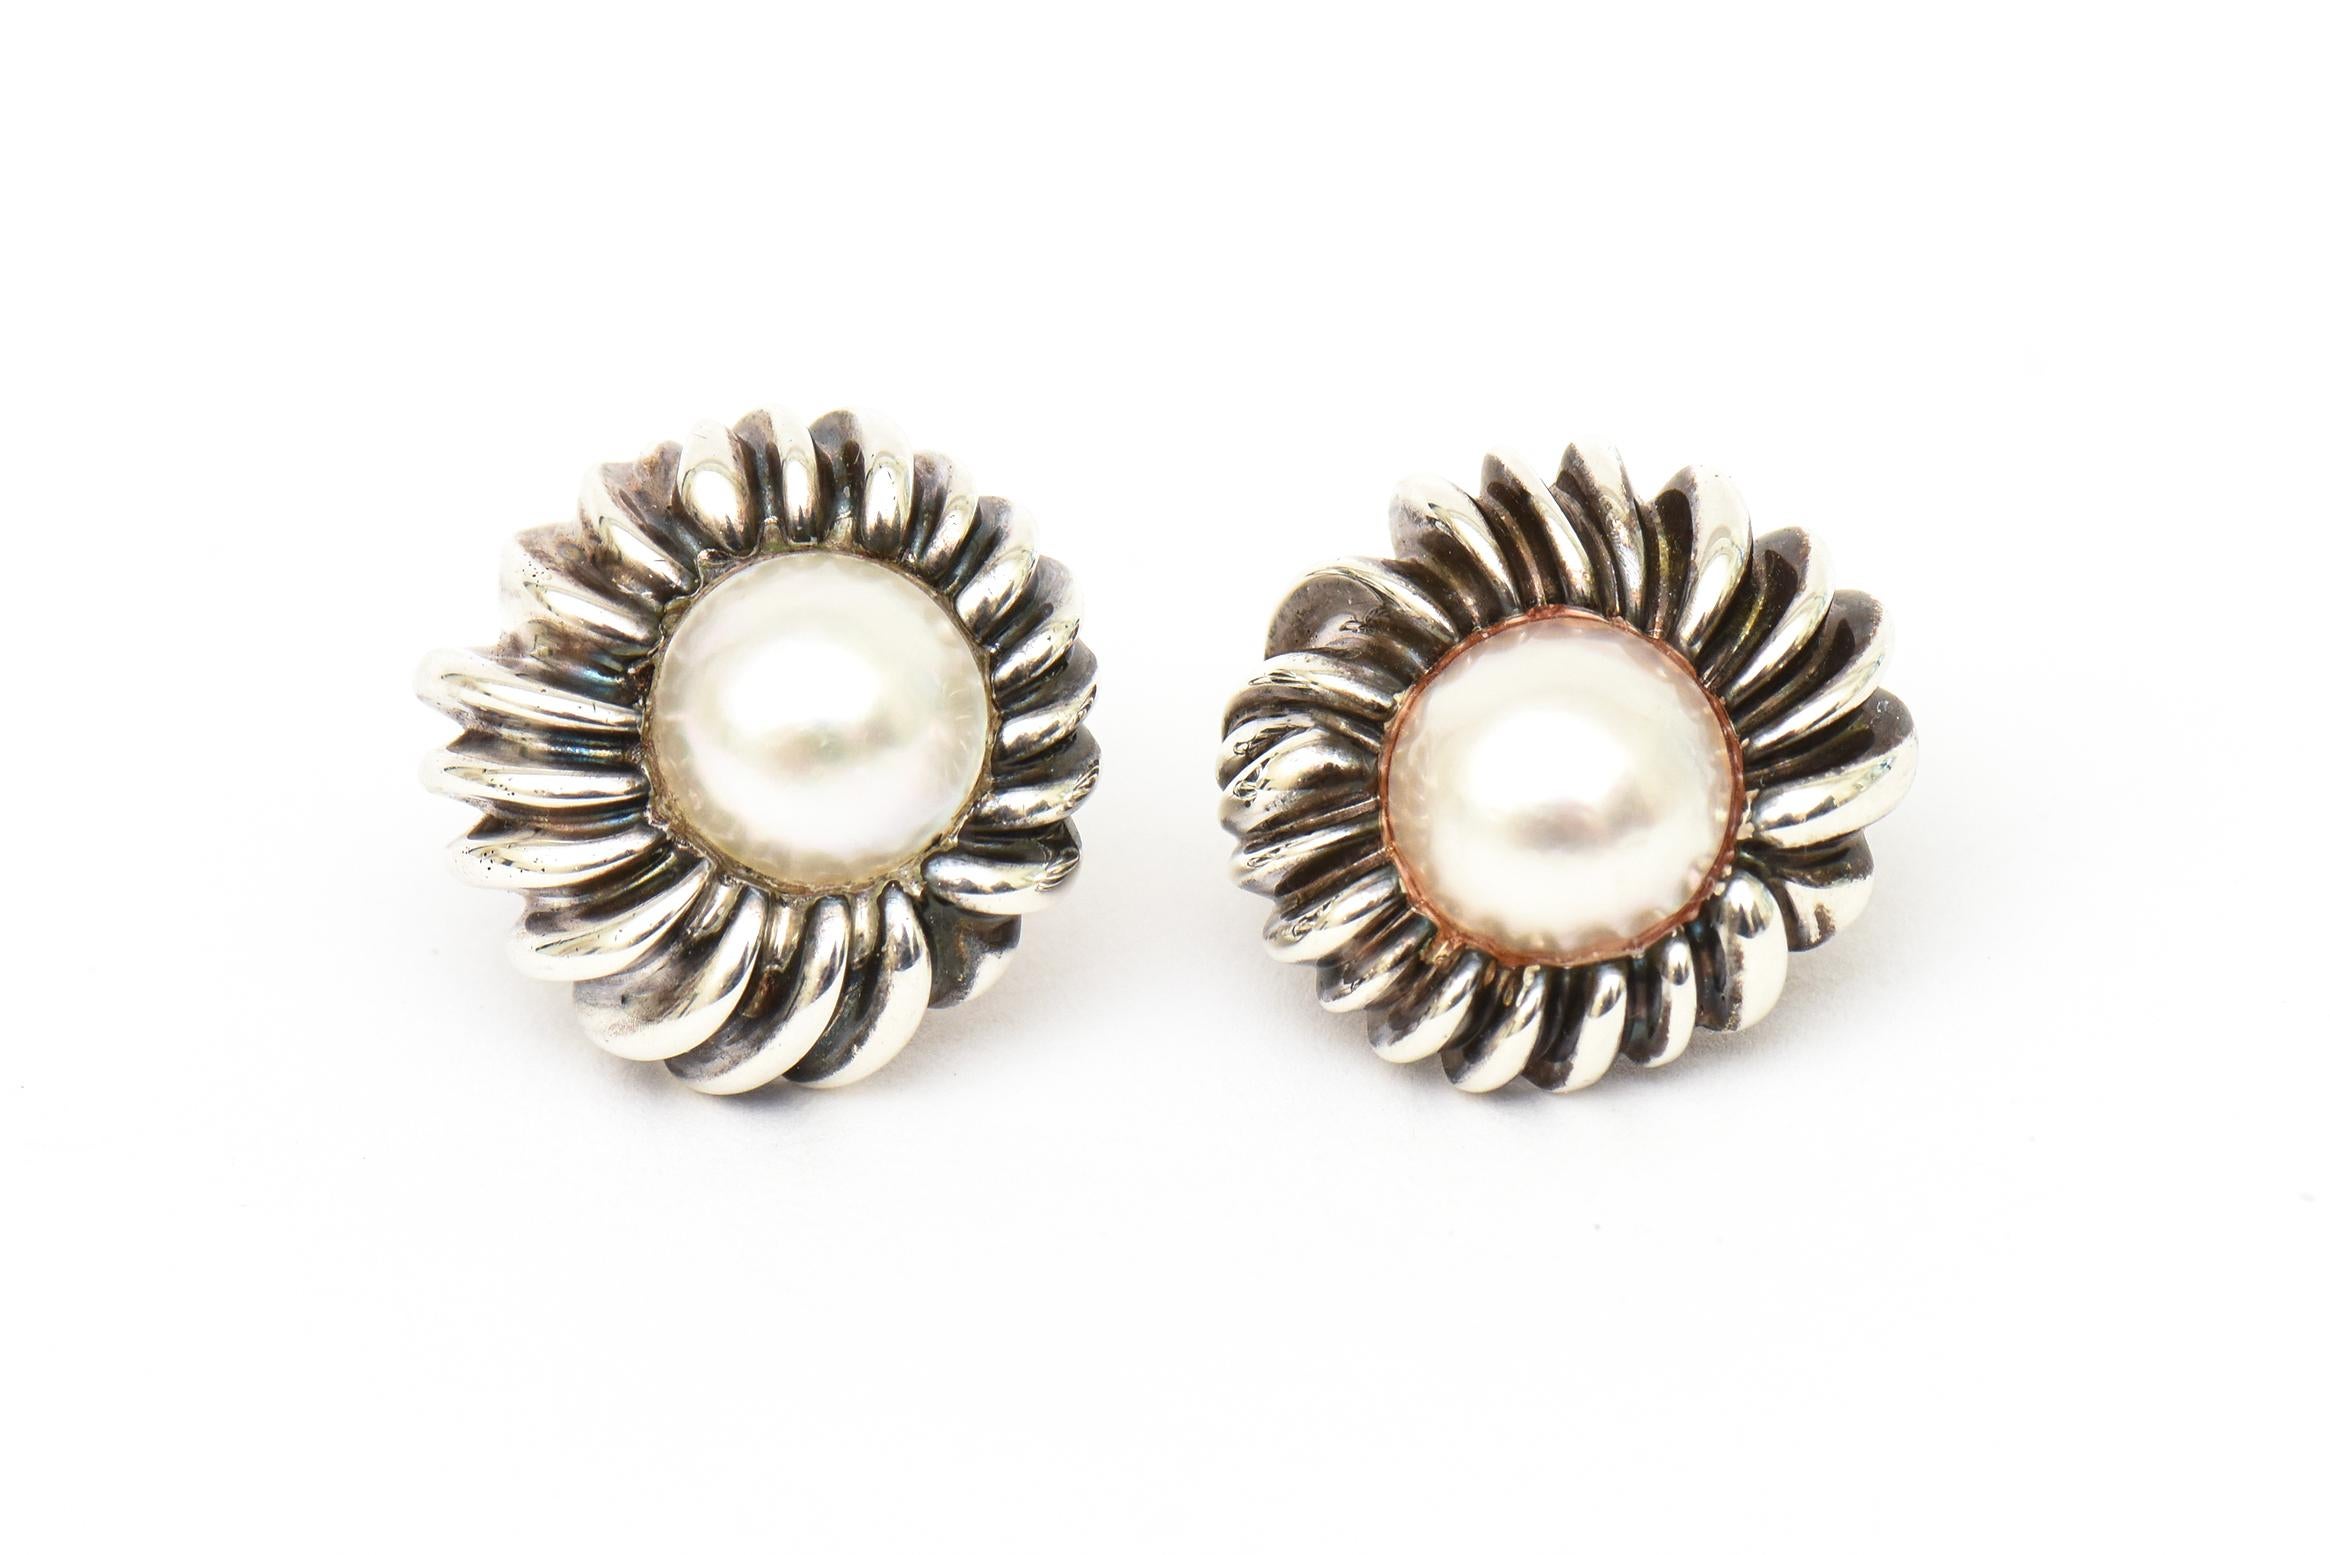 These classic and stunning vintage Tiffany and Co. hallmarked sterling silver and Mabe pearl lever back earrings can go day to evening. Hallmarked Tiffany &Co. Sterling. From the late 60's or early 70's. They have a perimeter sterling sculptural